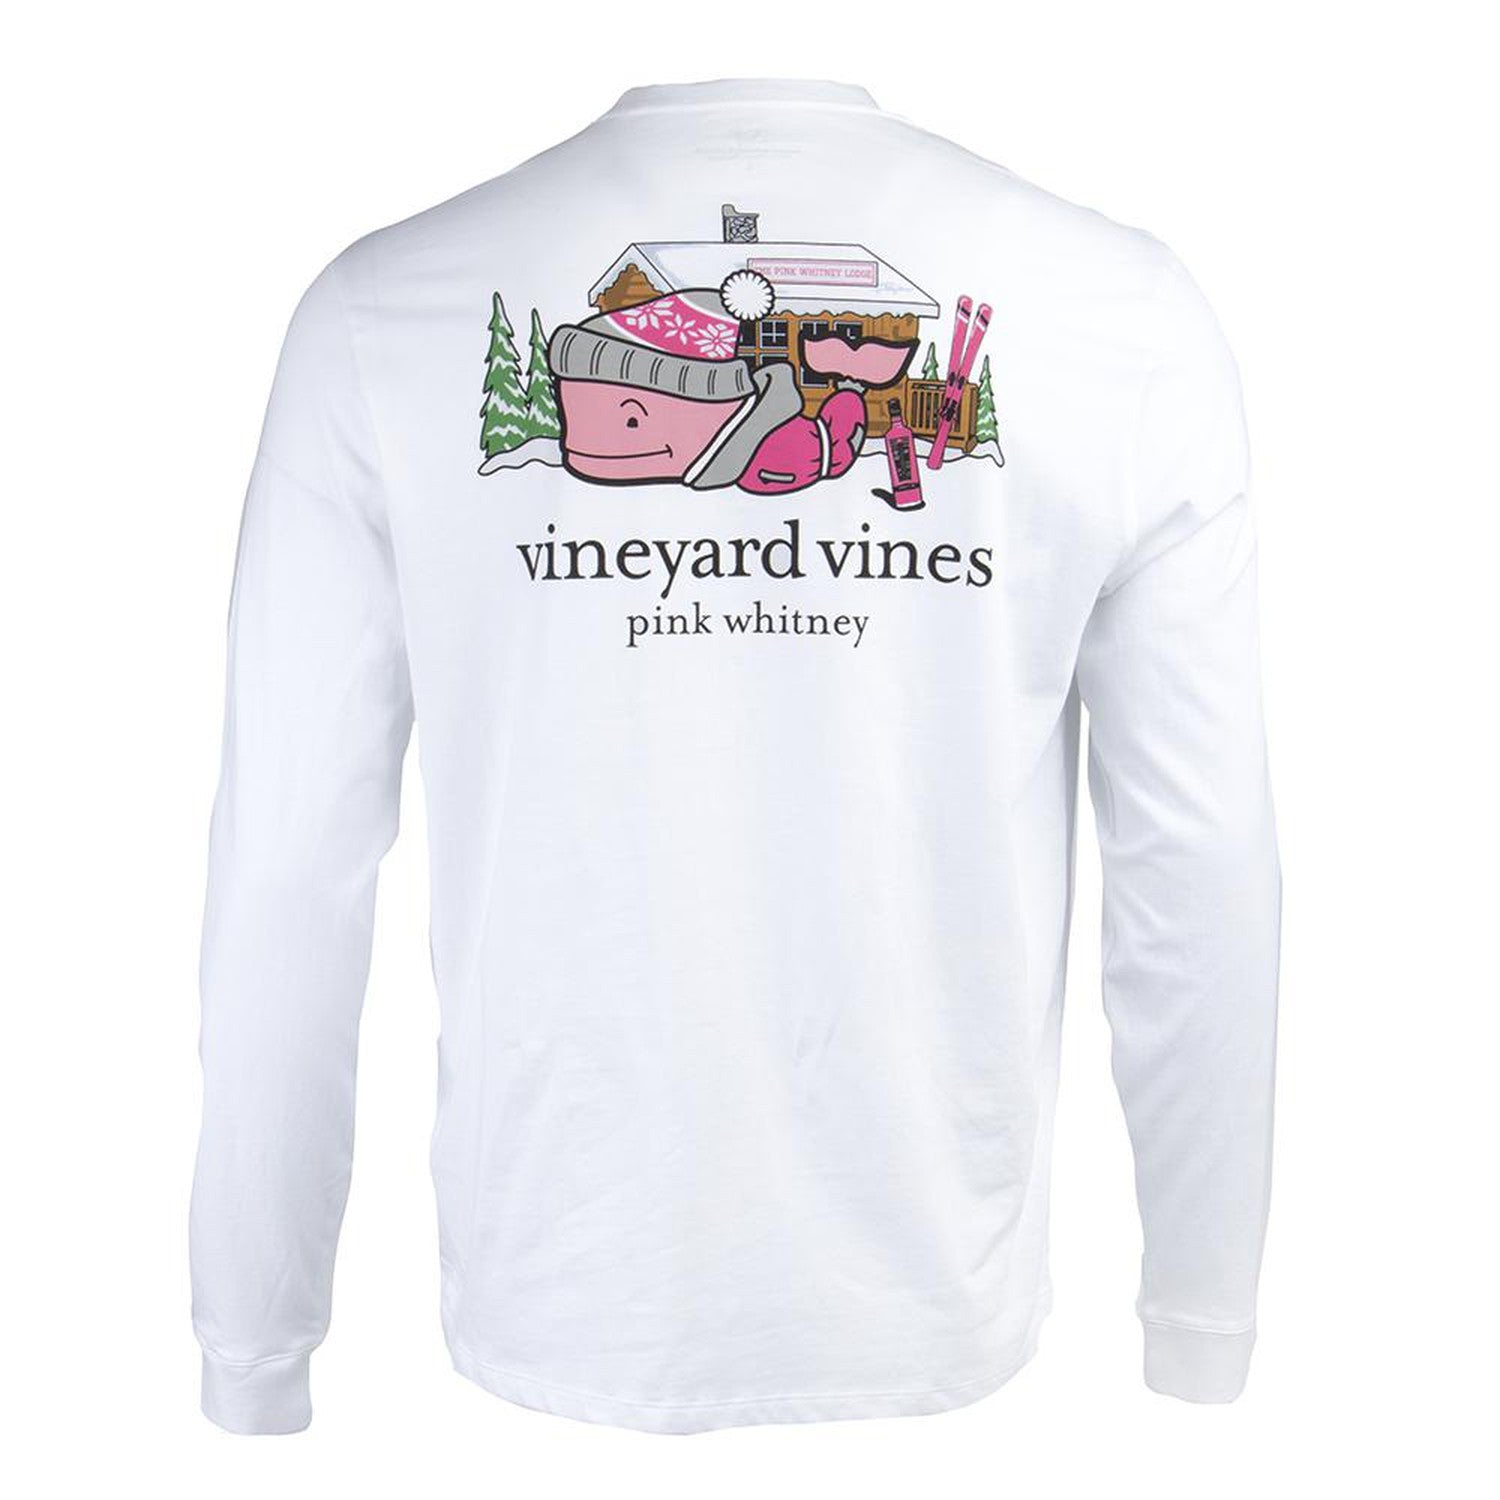 Reppin' The Pink Vineyard Vines T-Shirt (Every Day Should Feel